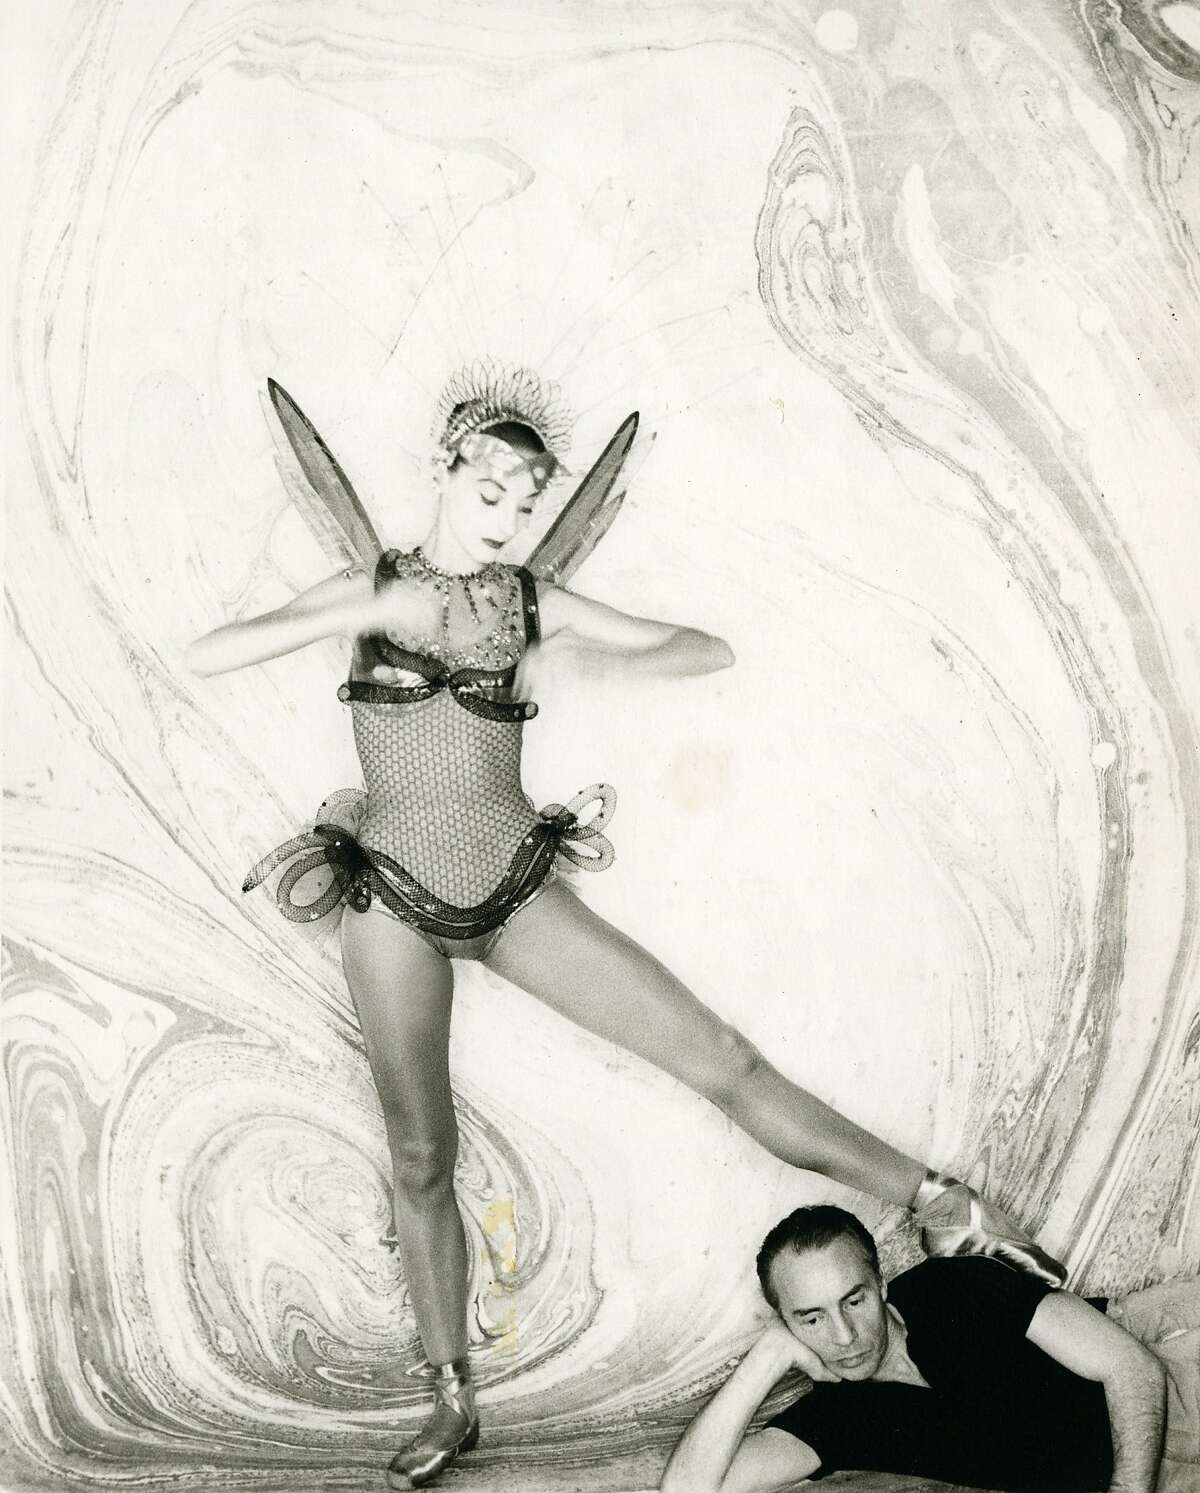 Tanaquil Le Clercq and George Balanchine in "Afternoon of a Faun: Tanaquil Le Clercq"